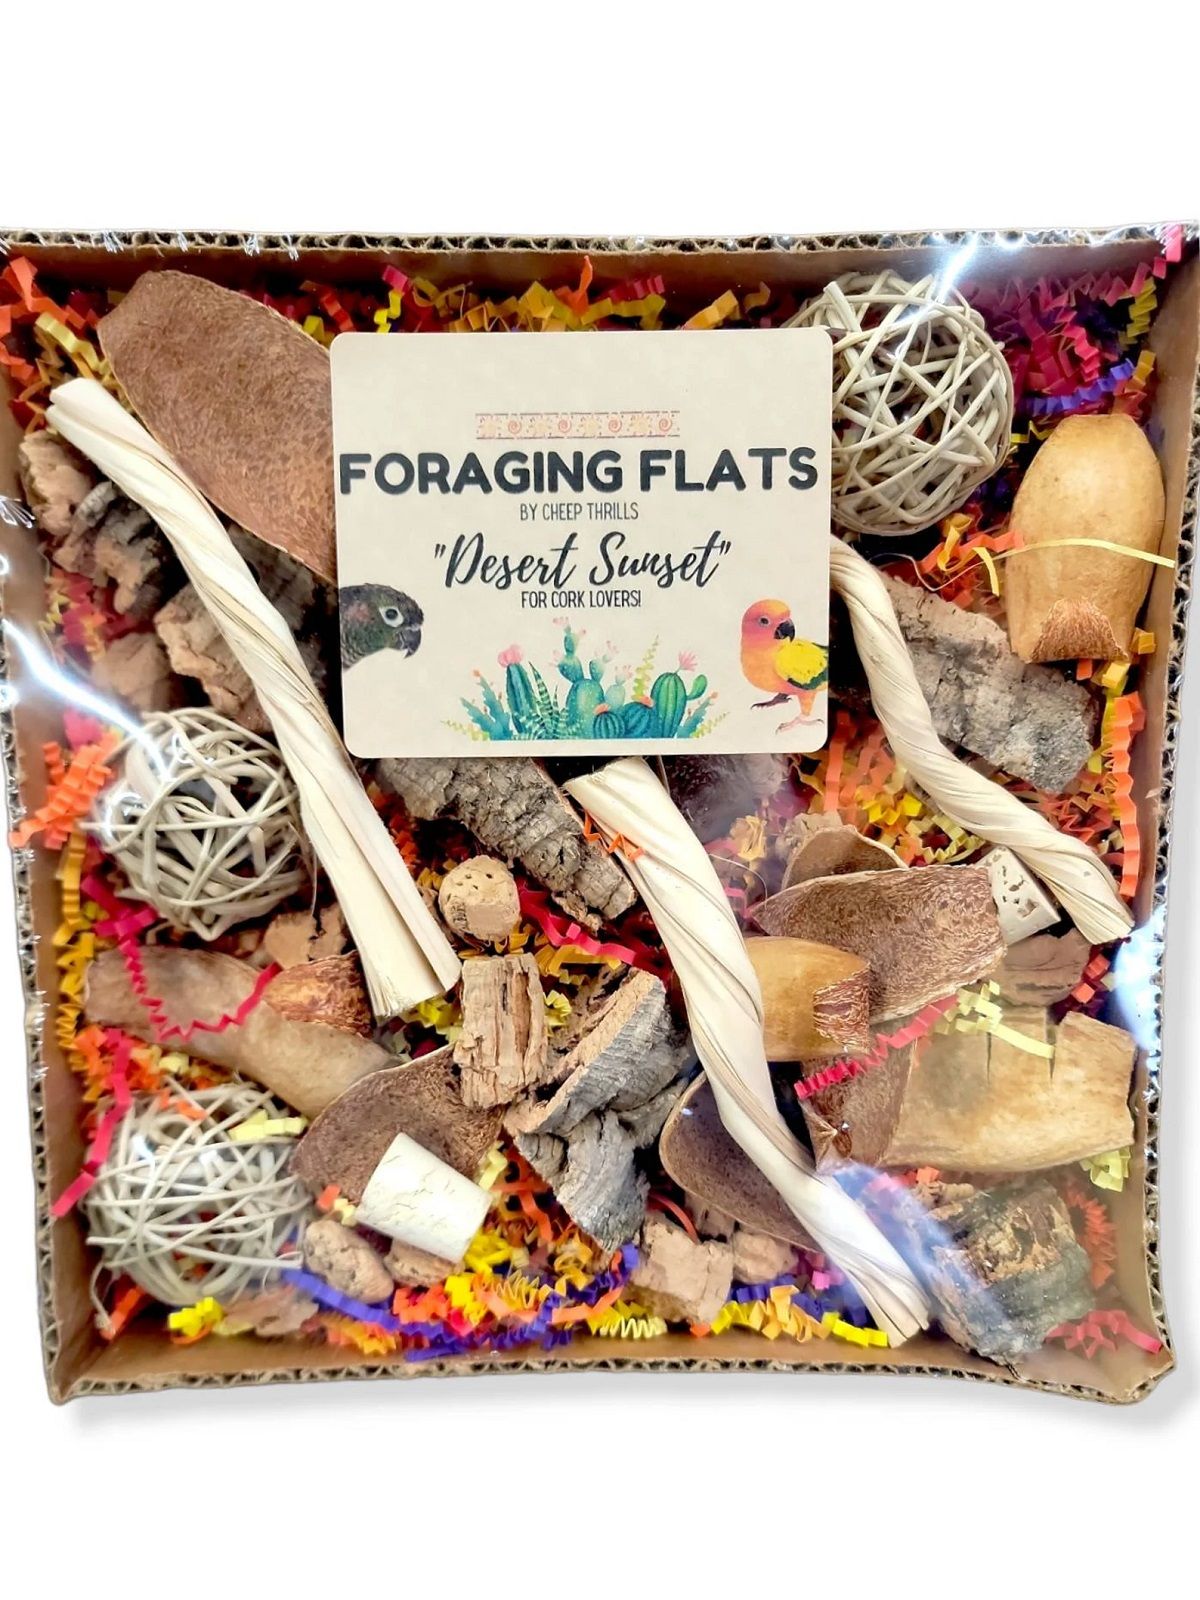 Desert Sunset Foraging Flats foraging box for parrots by Cheep Thrills on Etsy. 